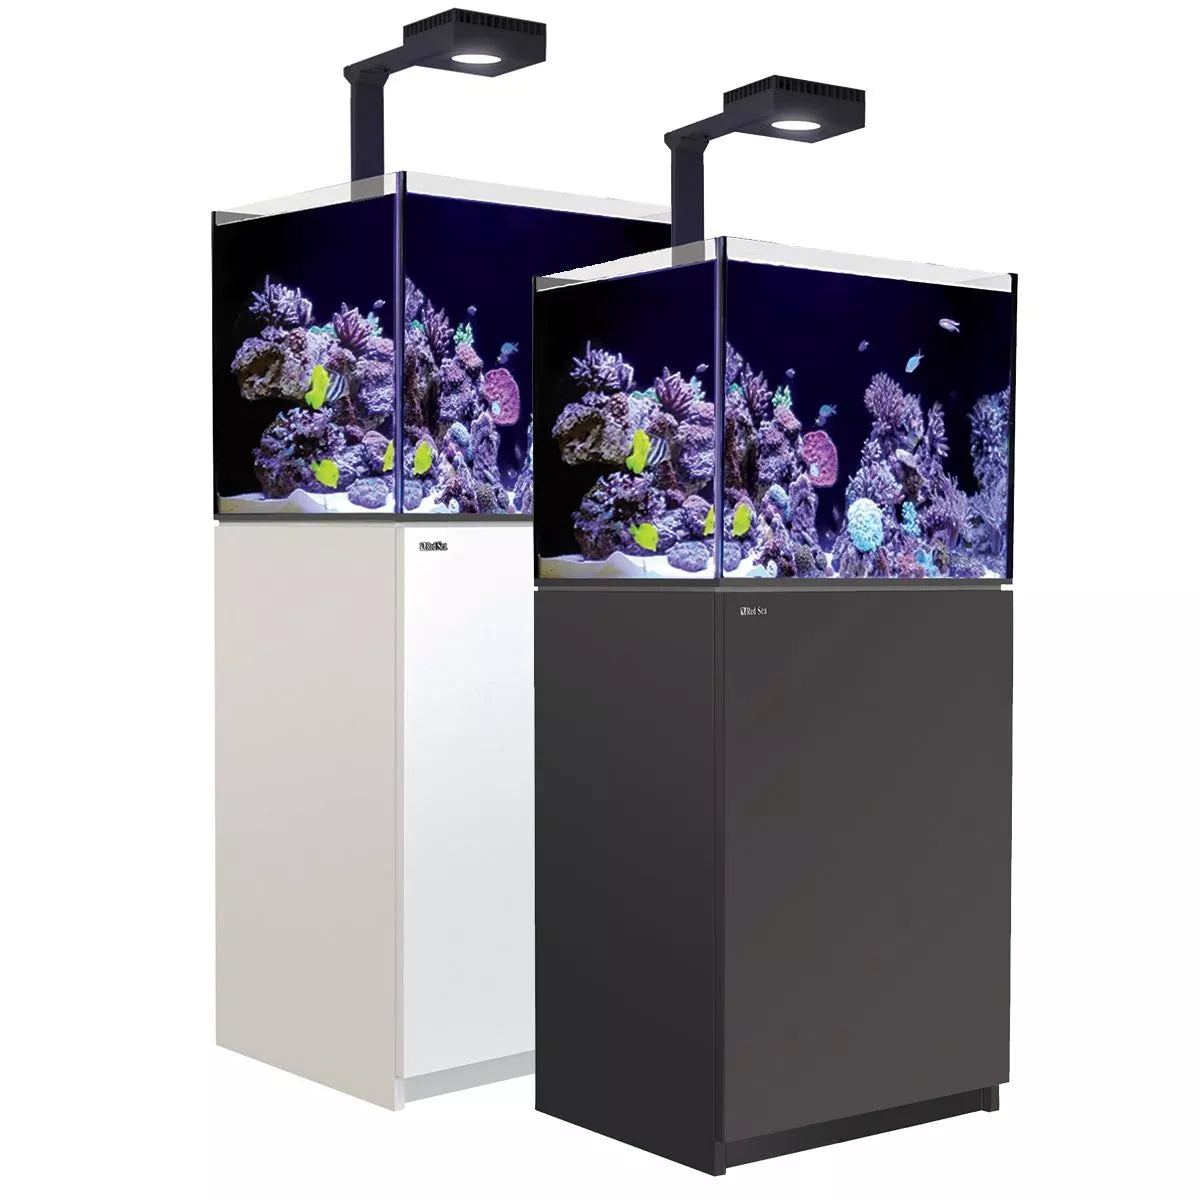 Reefer MAX 170 G2+ System (33 Gal) - Red Sea